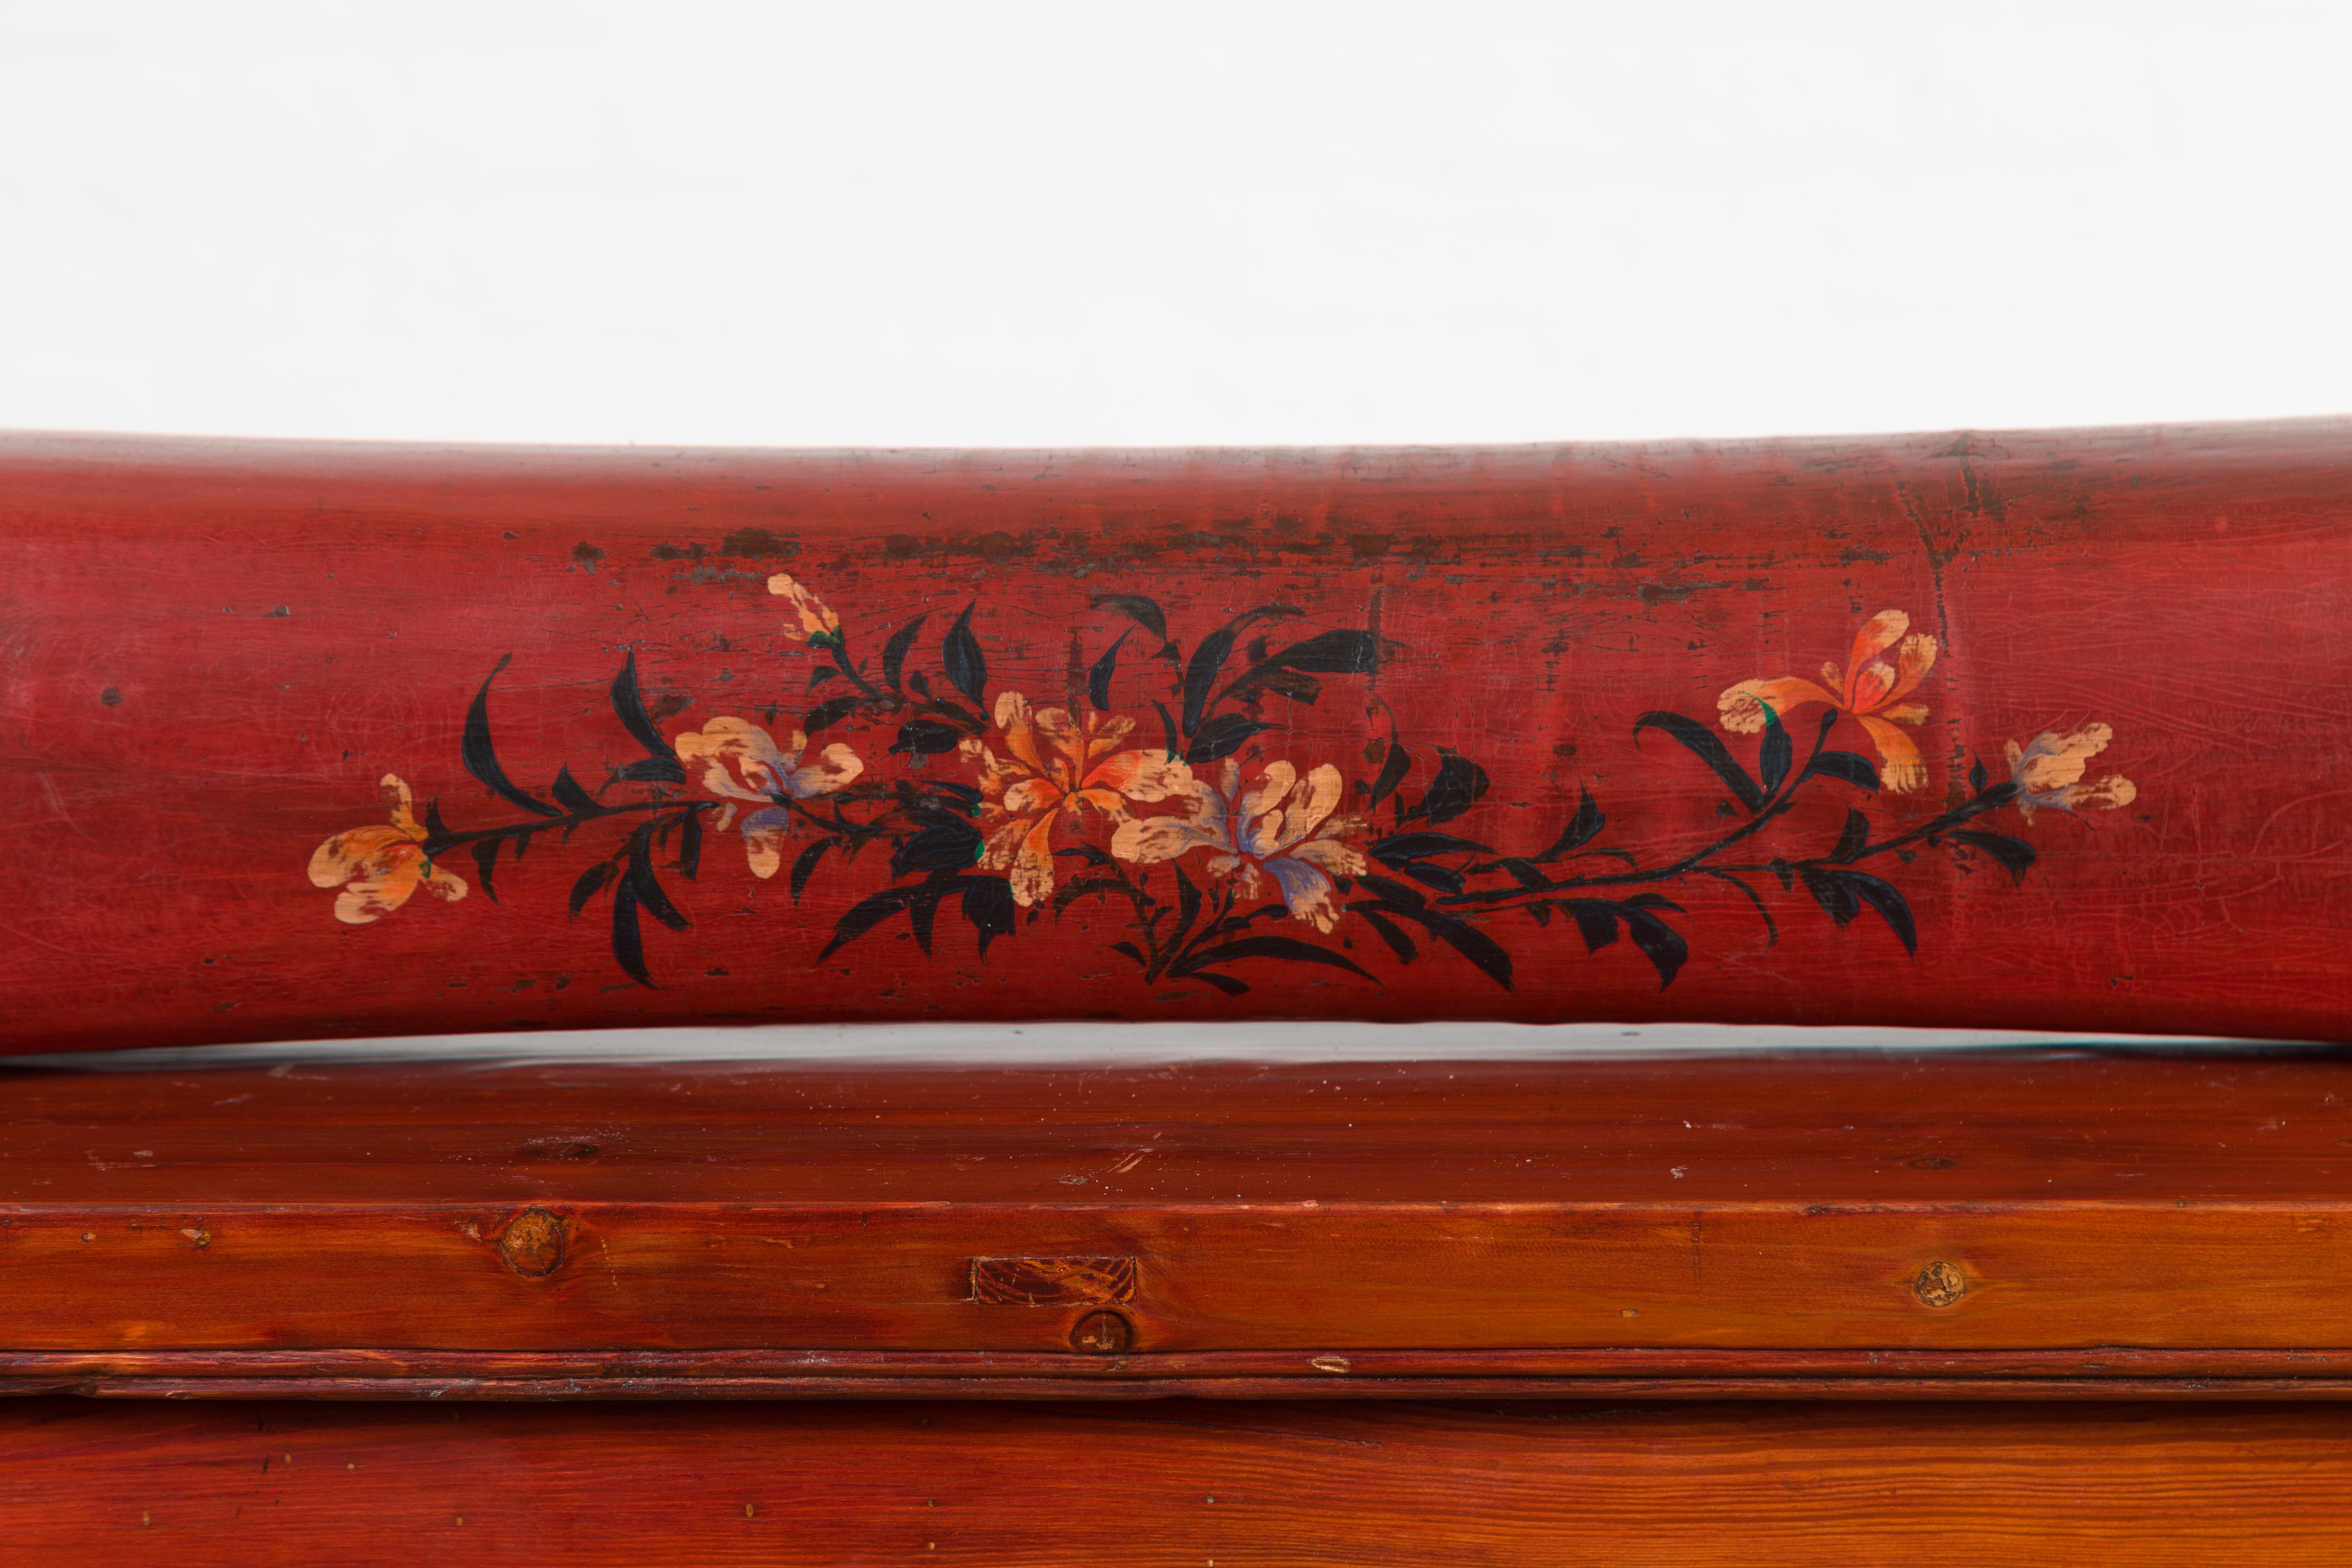 Chinese Qing Dynasty Cinnabar Lacquer Leather Pillow with Hand Painted Flowers In Good Condition For Sale In Yonkers, NY